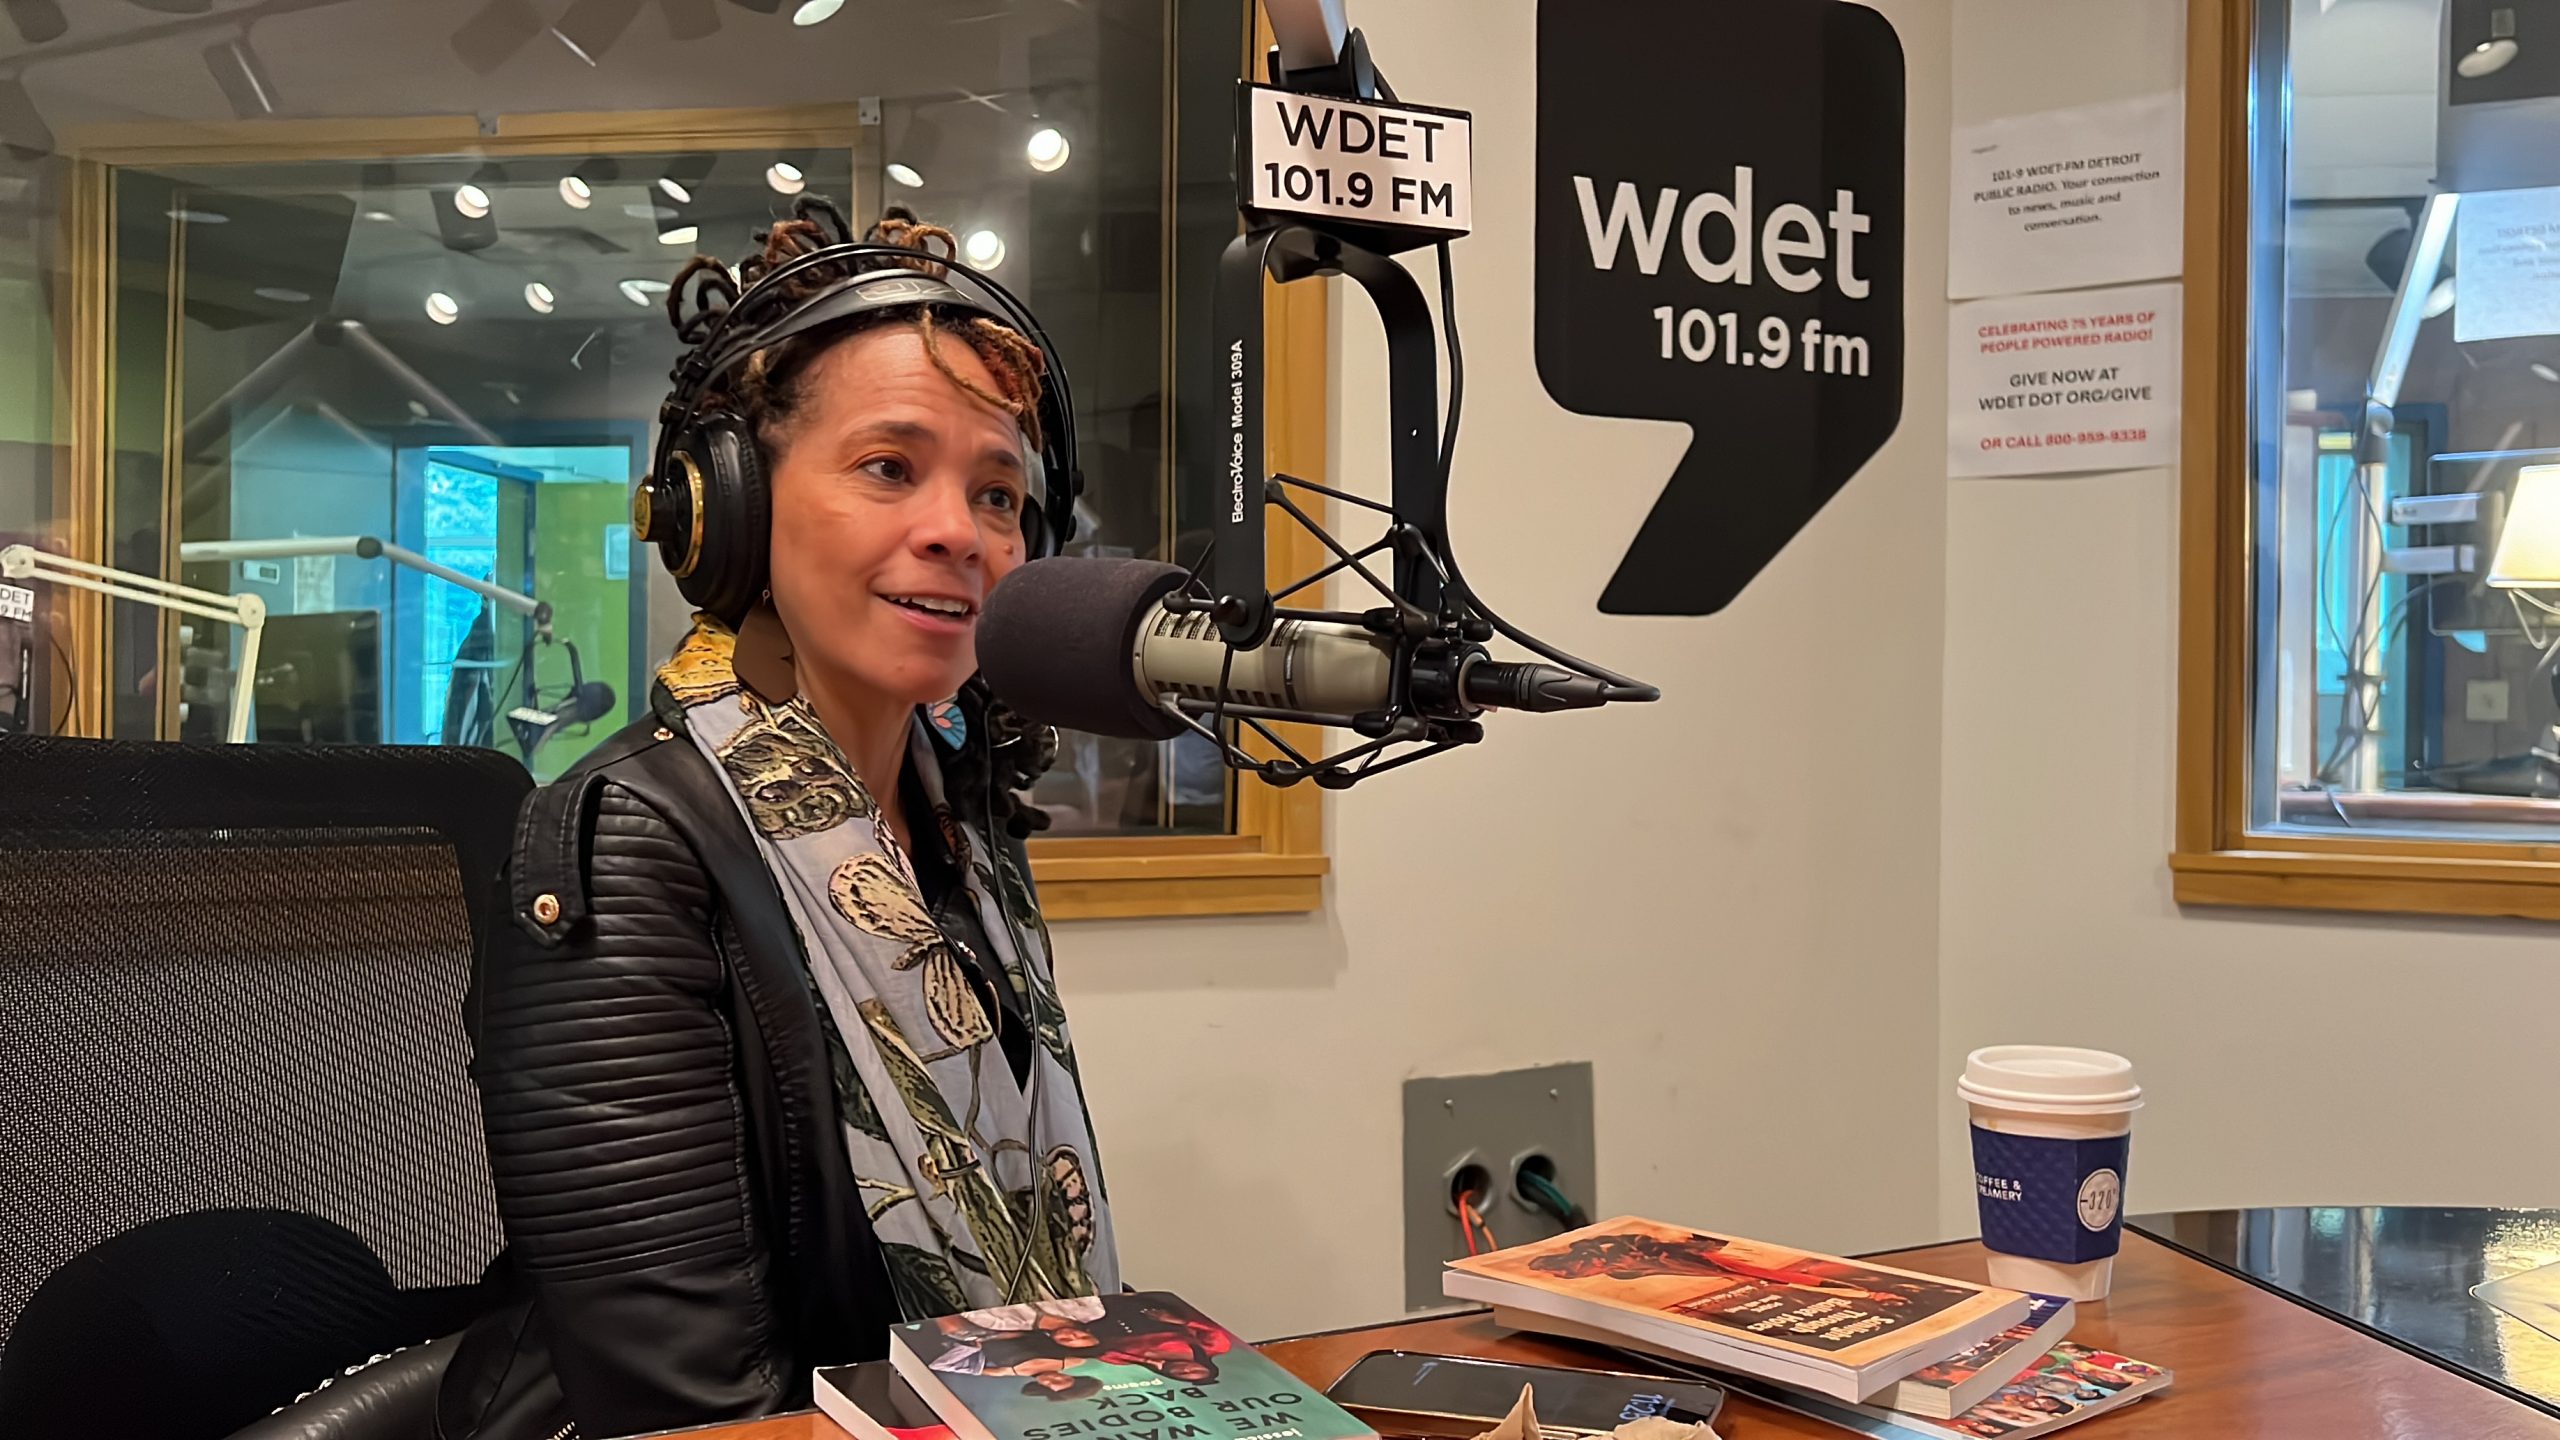 Detroits New Poet Laureate Jessica Care Moore Shares Her Plans For The Role Wdet 1019 Fm 